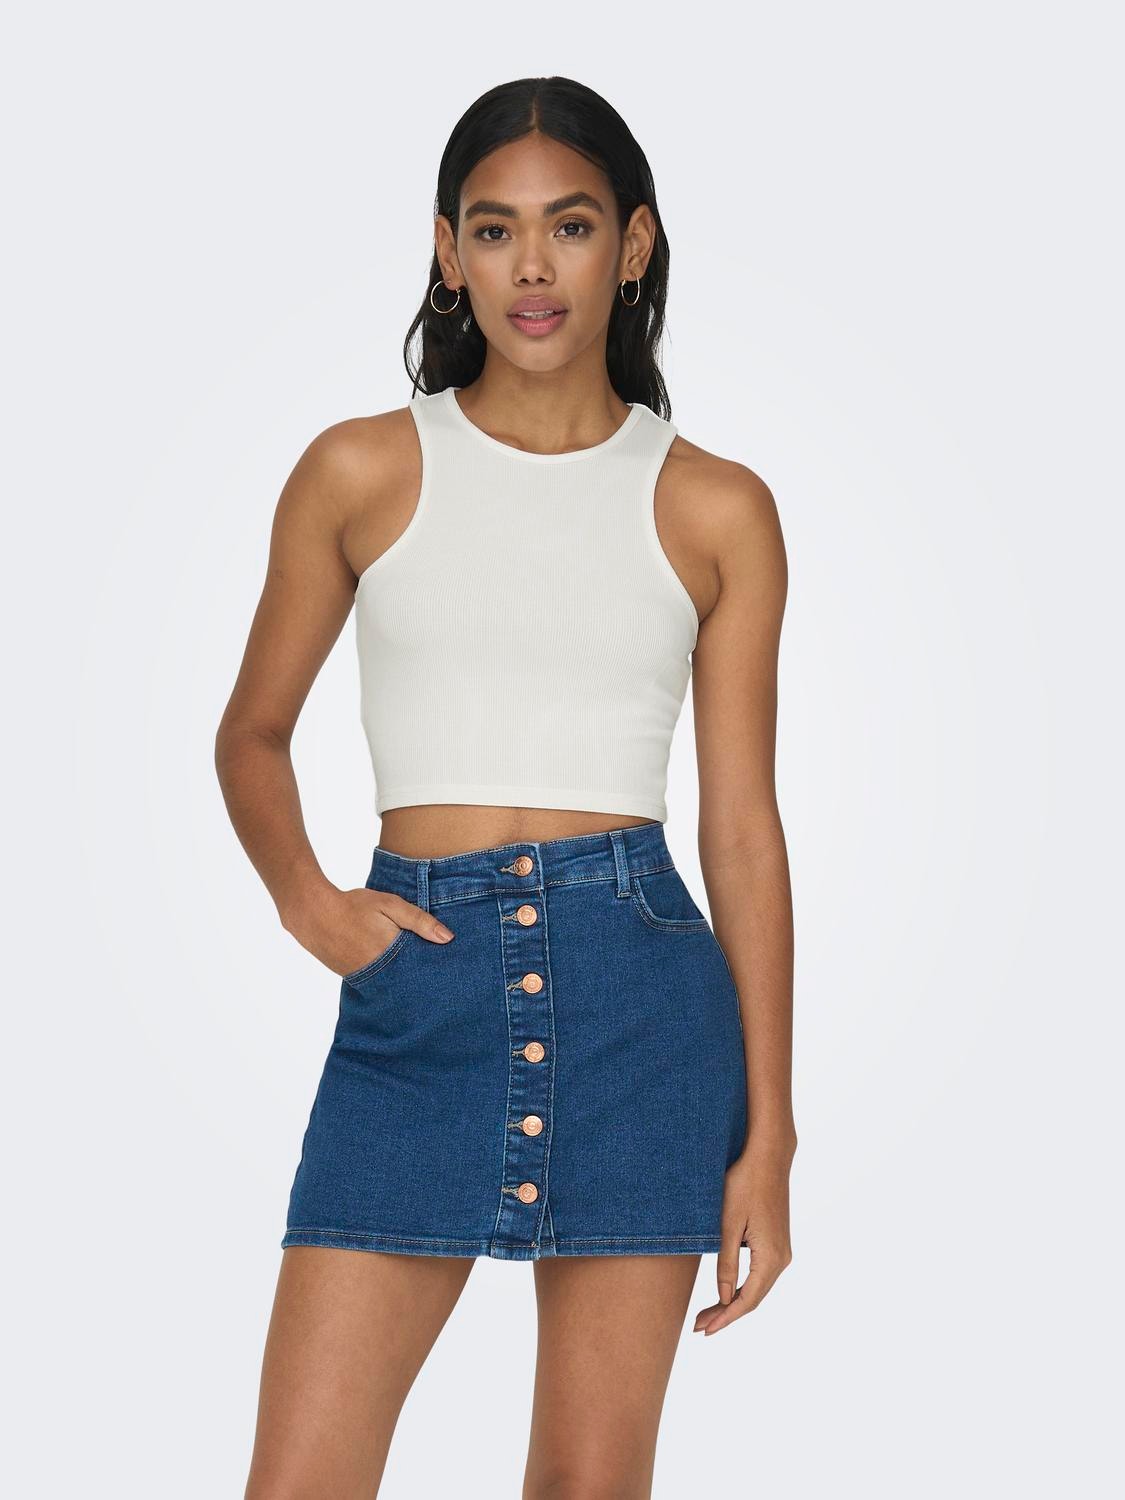 ONLY Cropped Tank Top -Cloud Dancer - 15289846